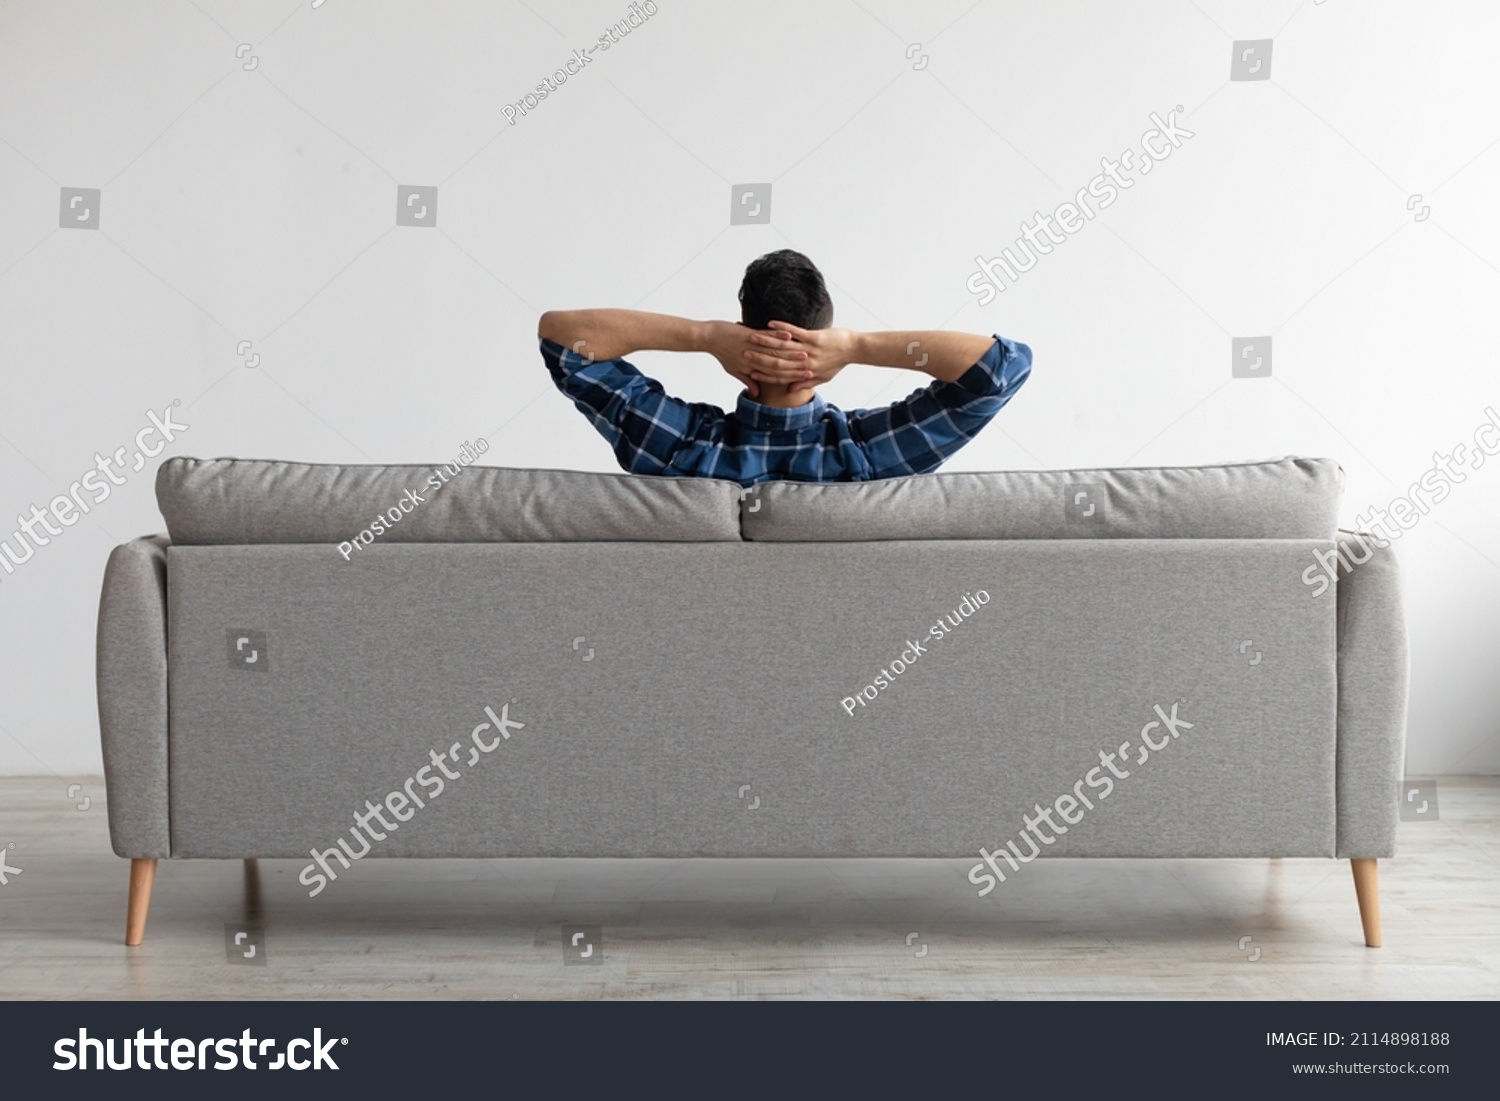 Rear view of young guy sitting on comfortable couch at home in living room, looking at wall. Casual man relaxing on sofa, leaning back holding hands behind head, enjoying weekend free time or break #2114898188